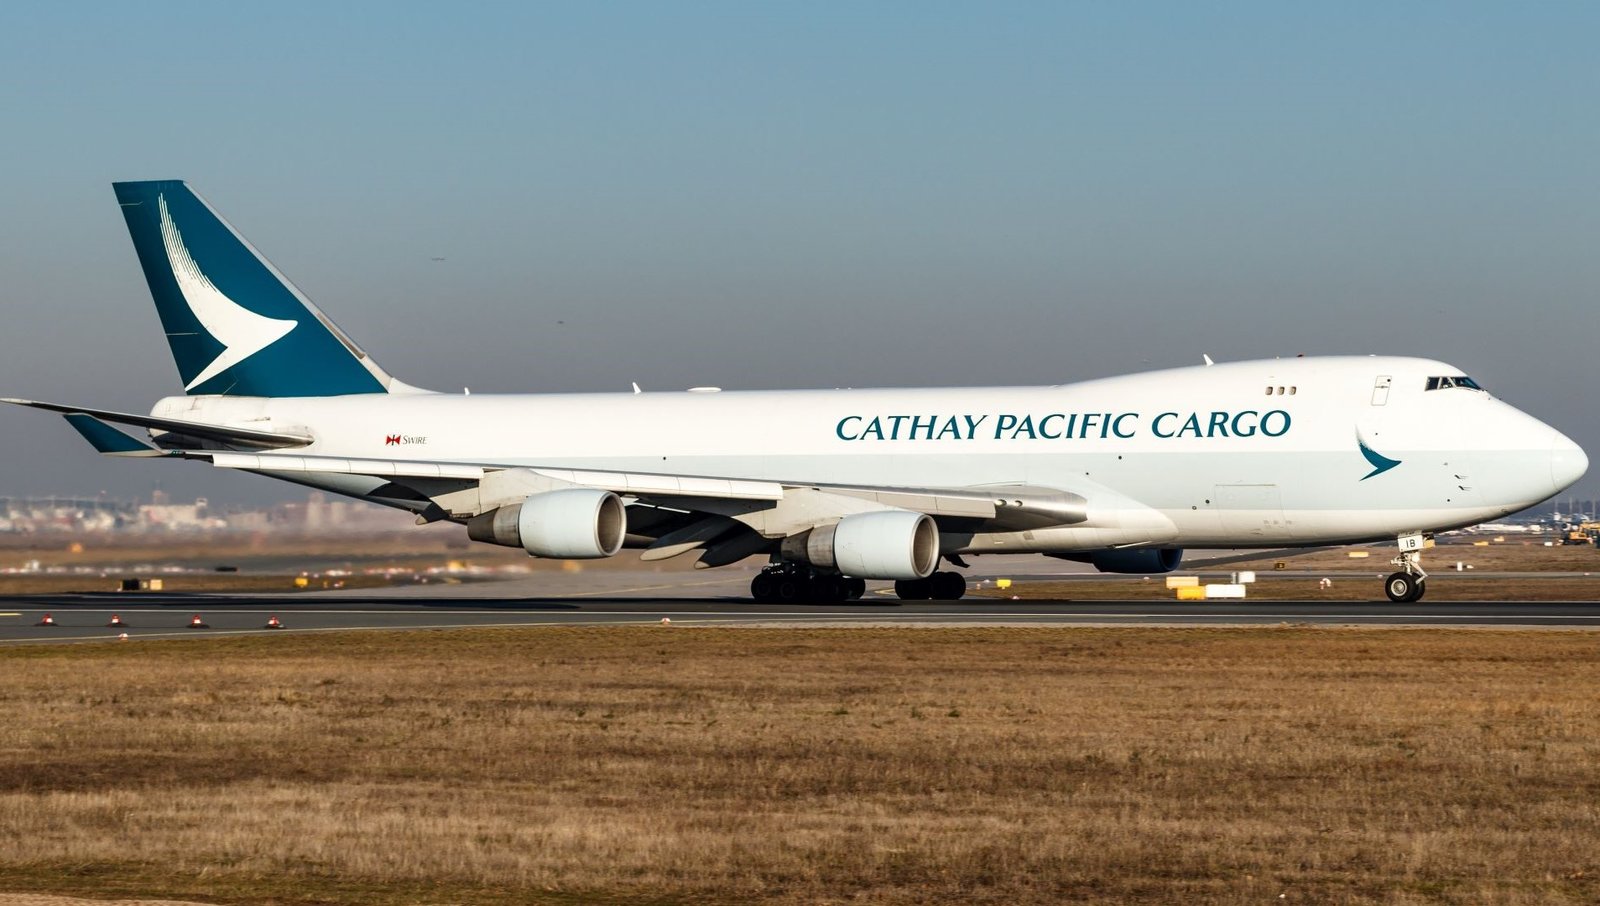 SWOT analysis of Cathay Pacific